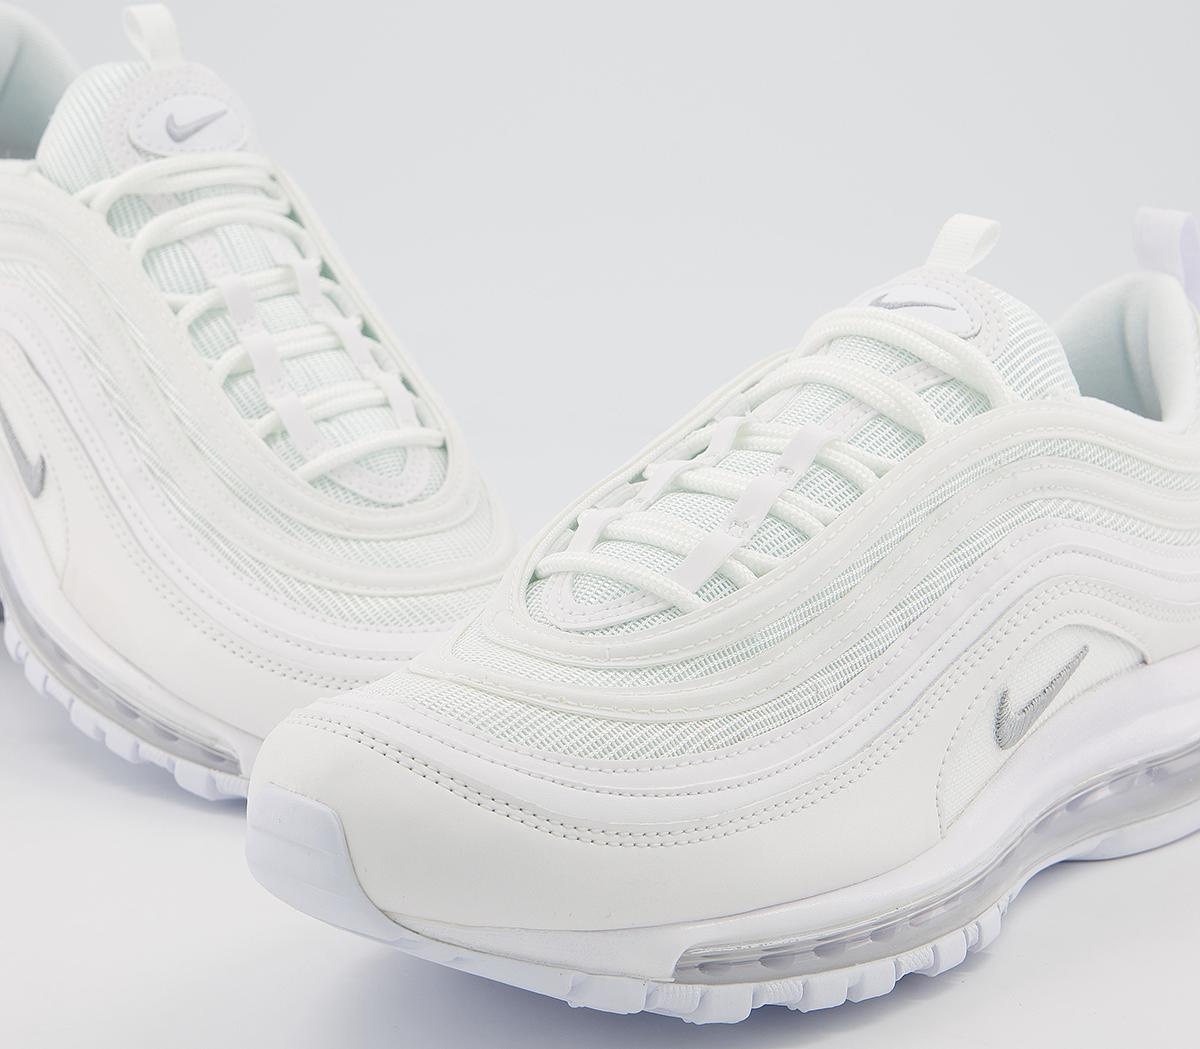 Nike Air Max 97 Trainers White Wolf Grey - Women's Classic Trainers